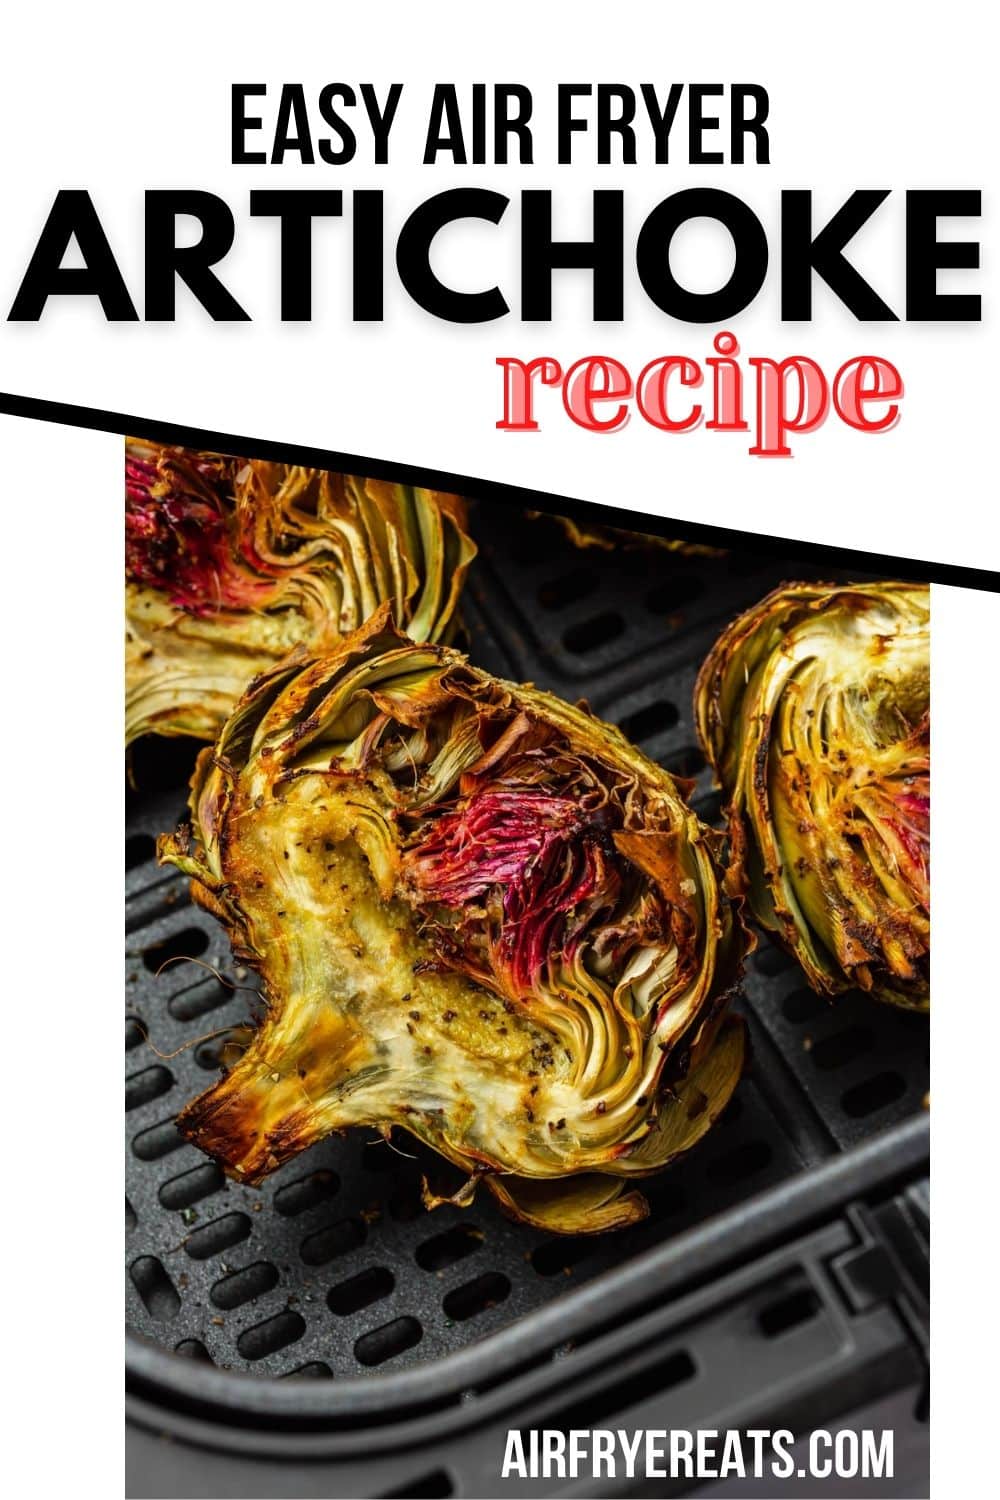 cooked artichoke in an air fryer basket. Text at top of image says easy air fryer artichoke recipe